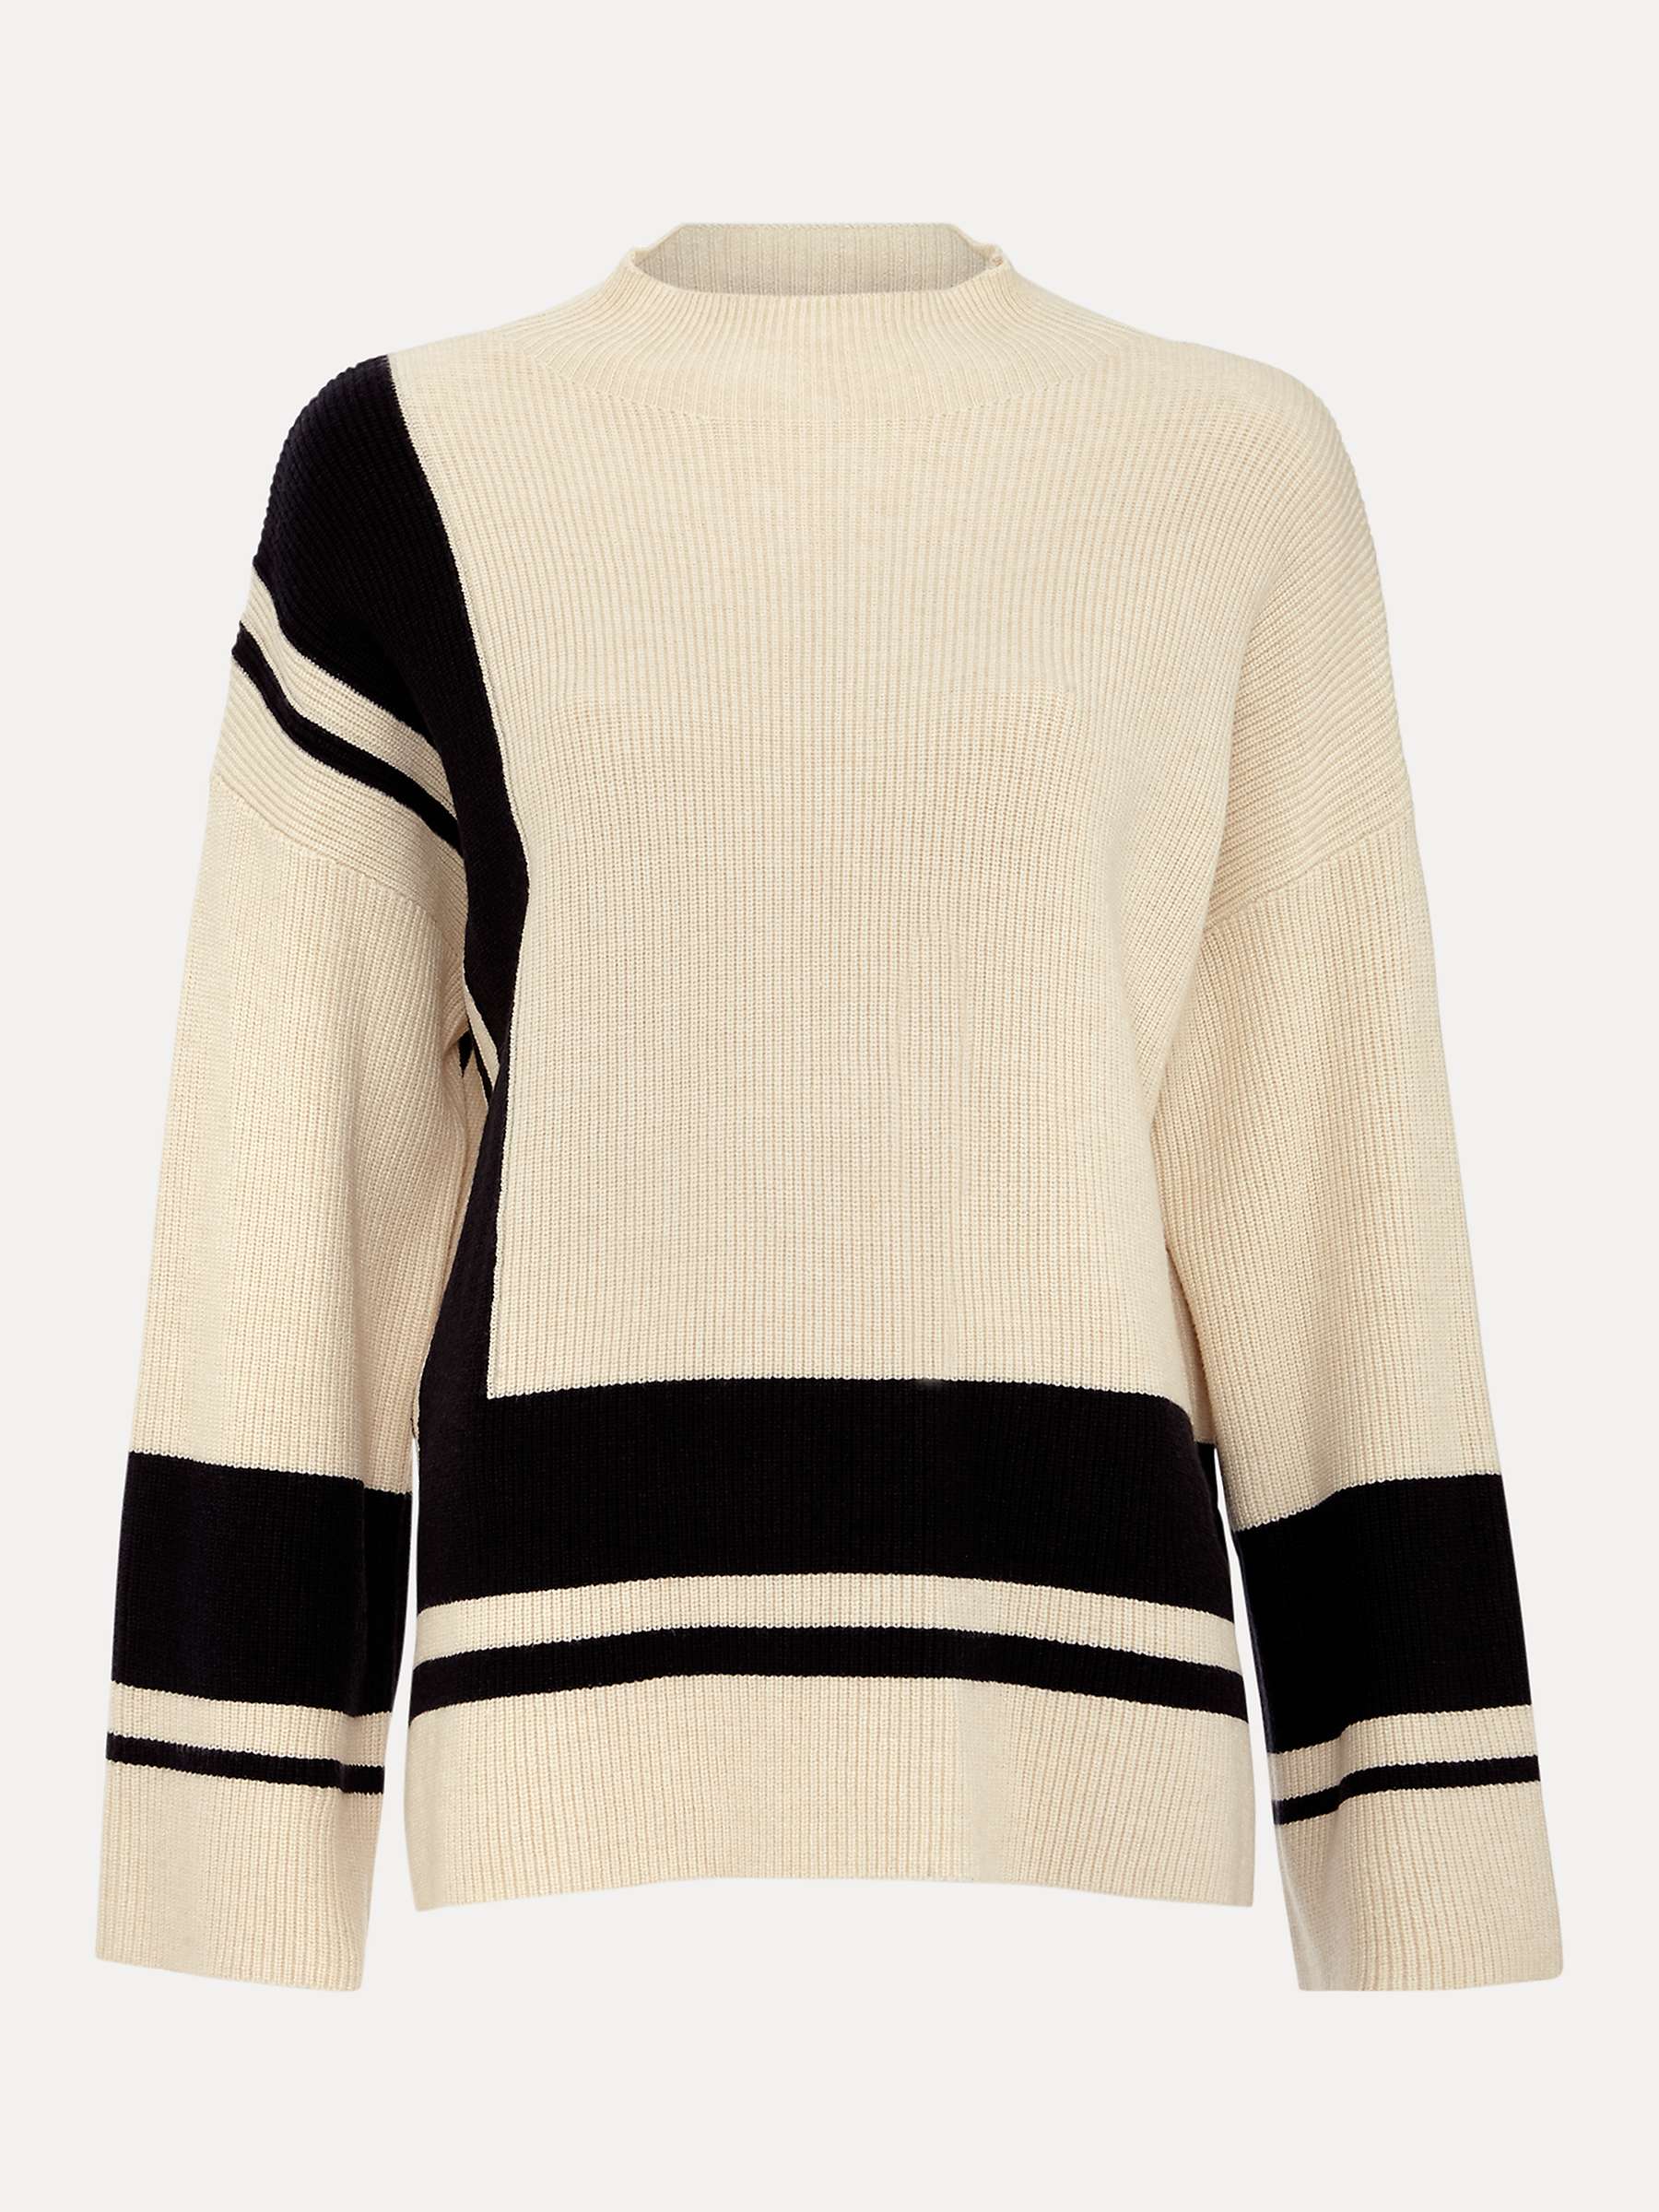 Buy Phase Eight Kayleigh Ribbed Colour Block Jumper, Stone/Navy Online at johnlewis.com